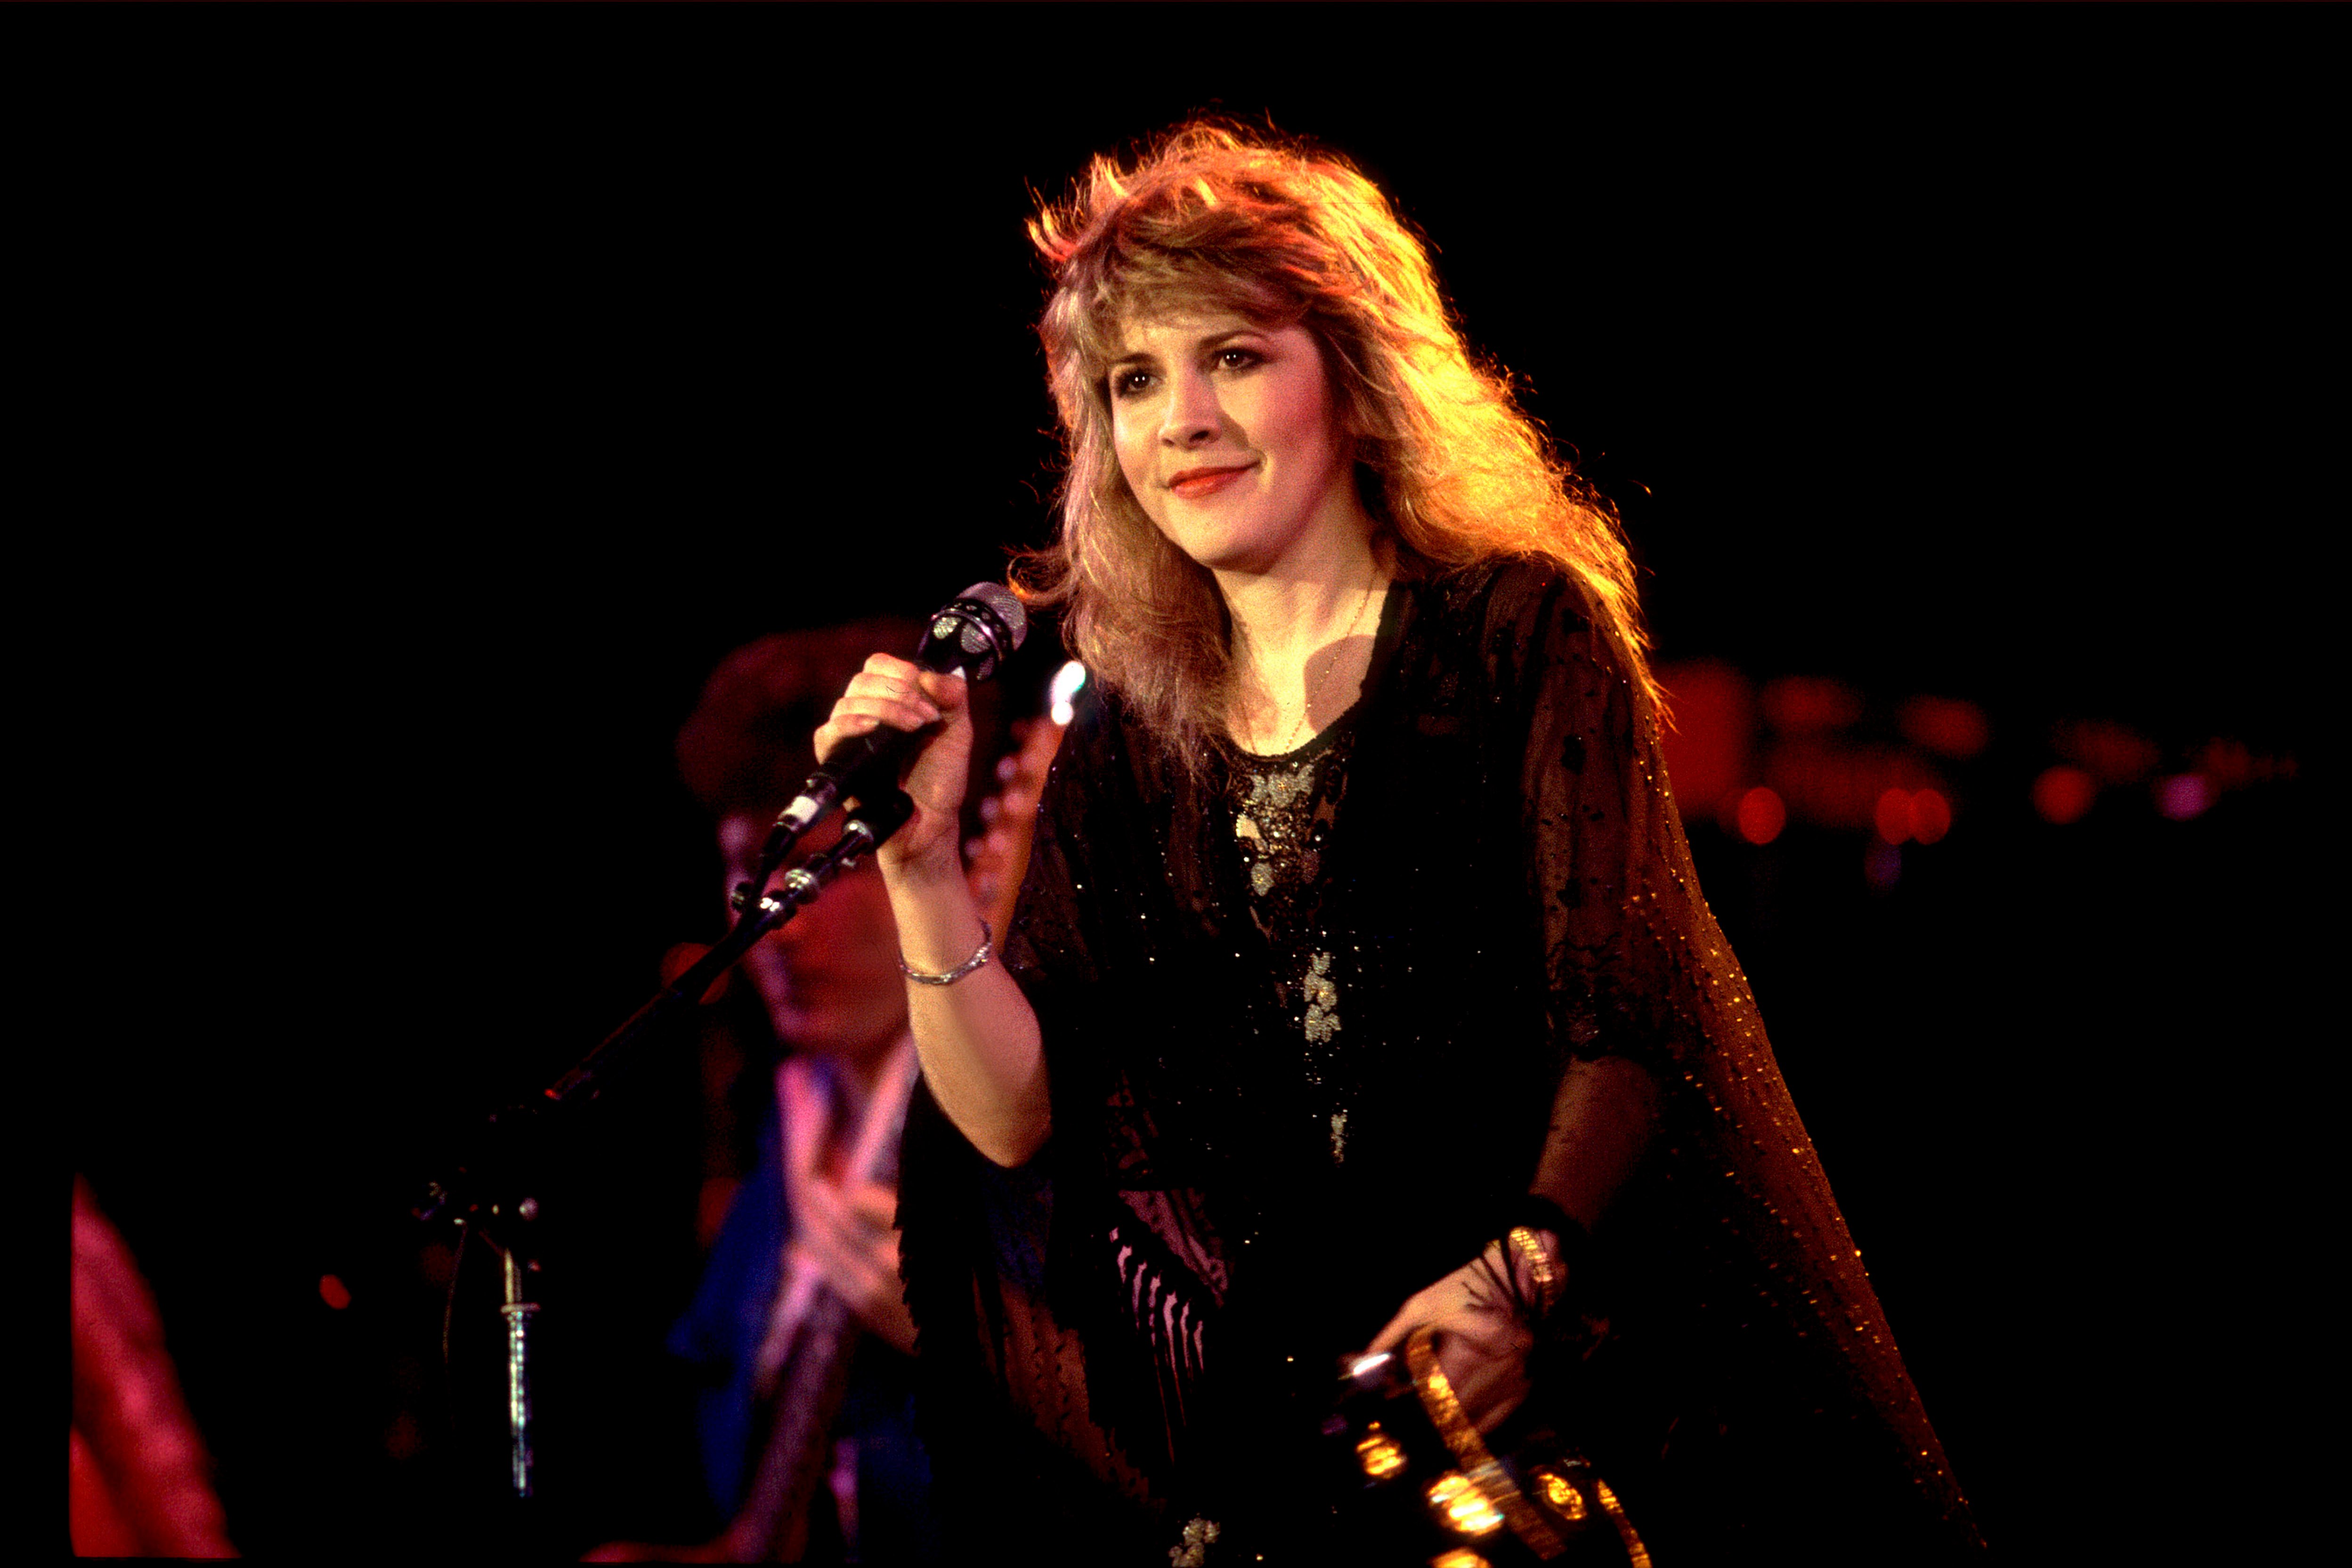 Fleetwood Mac's Stevie Nicks with a microphone